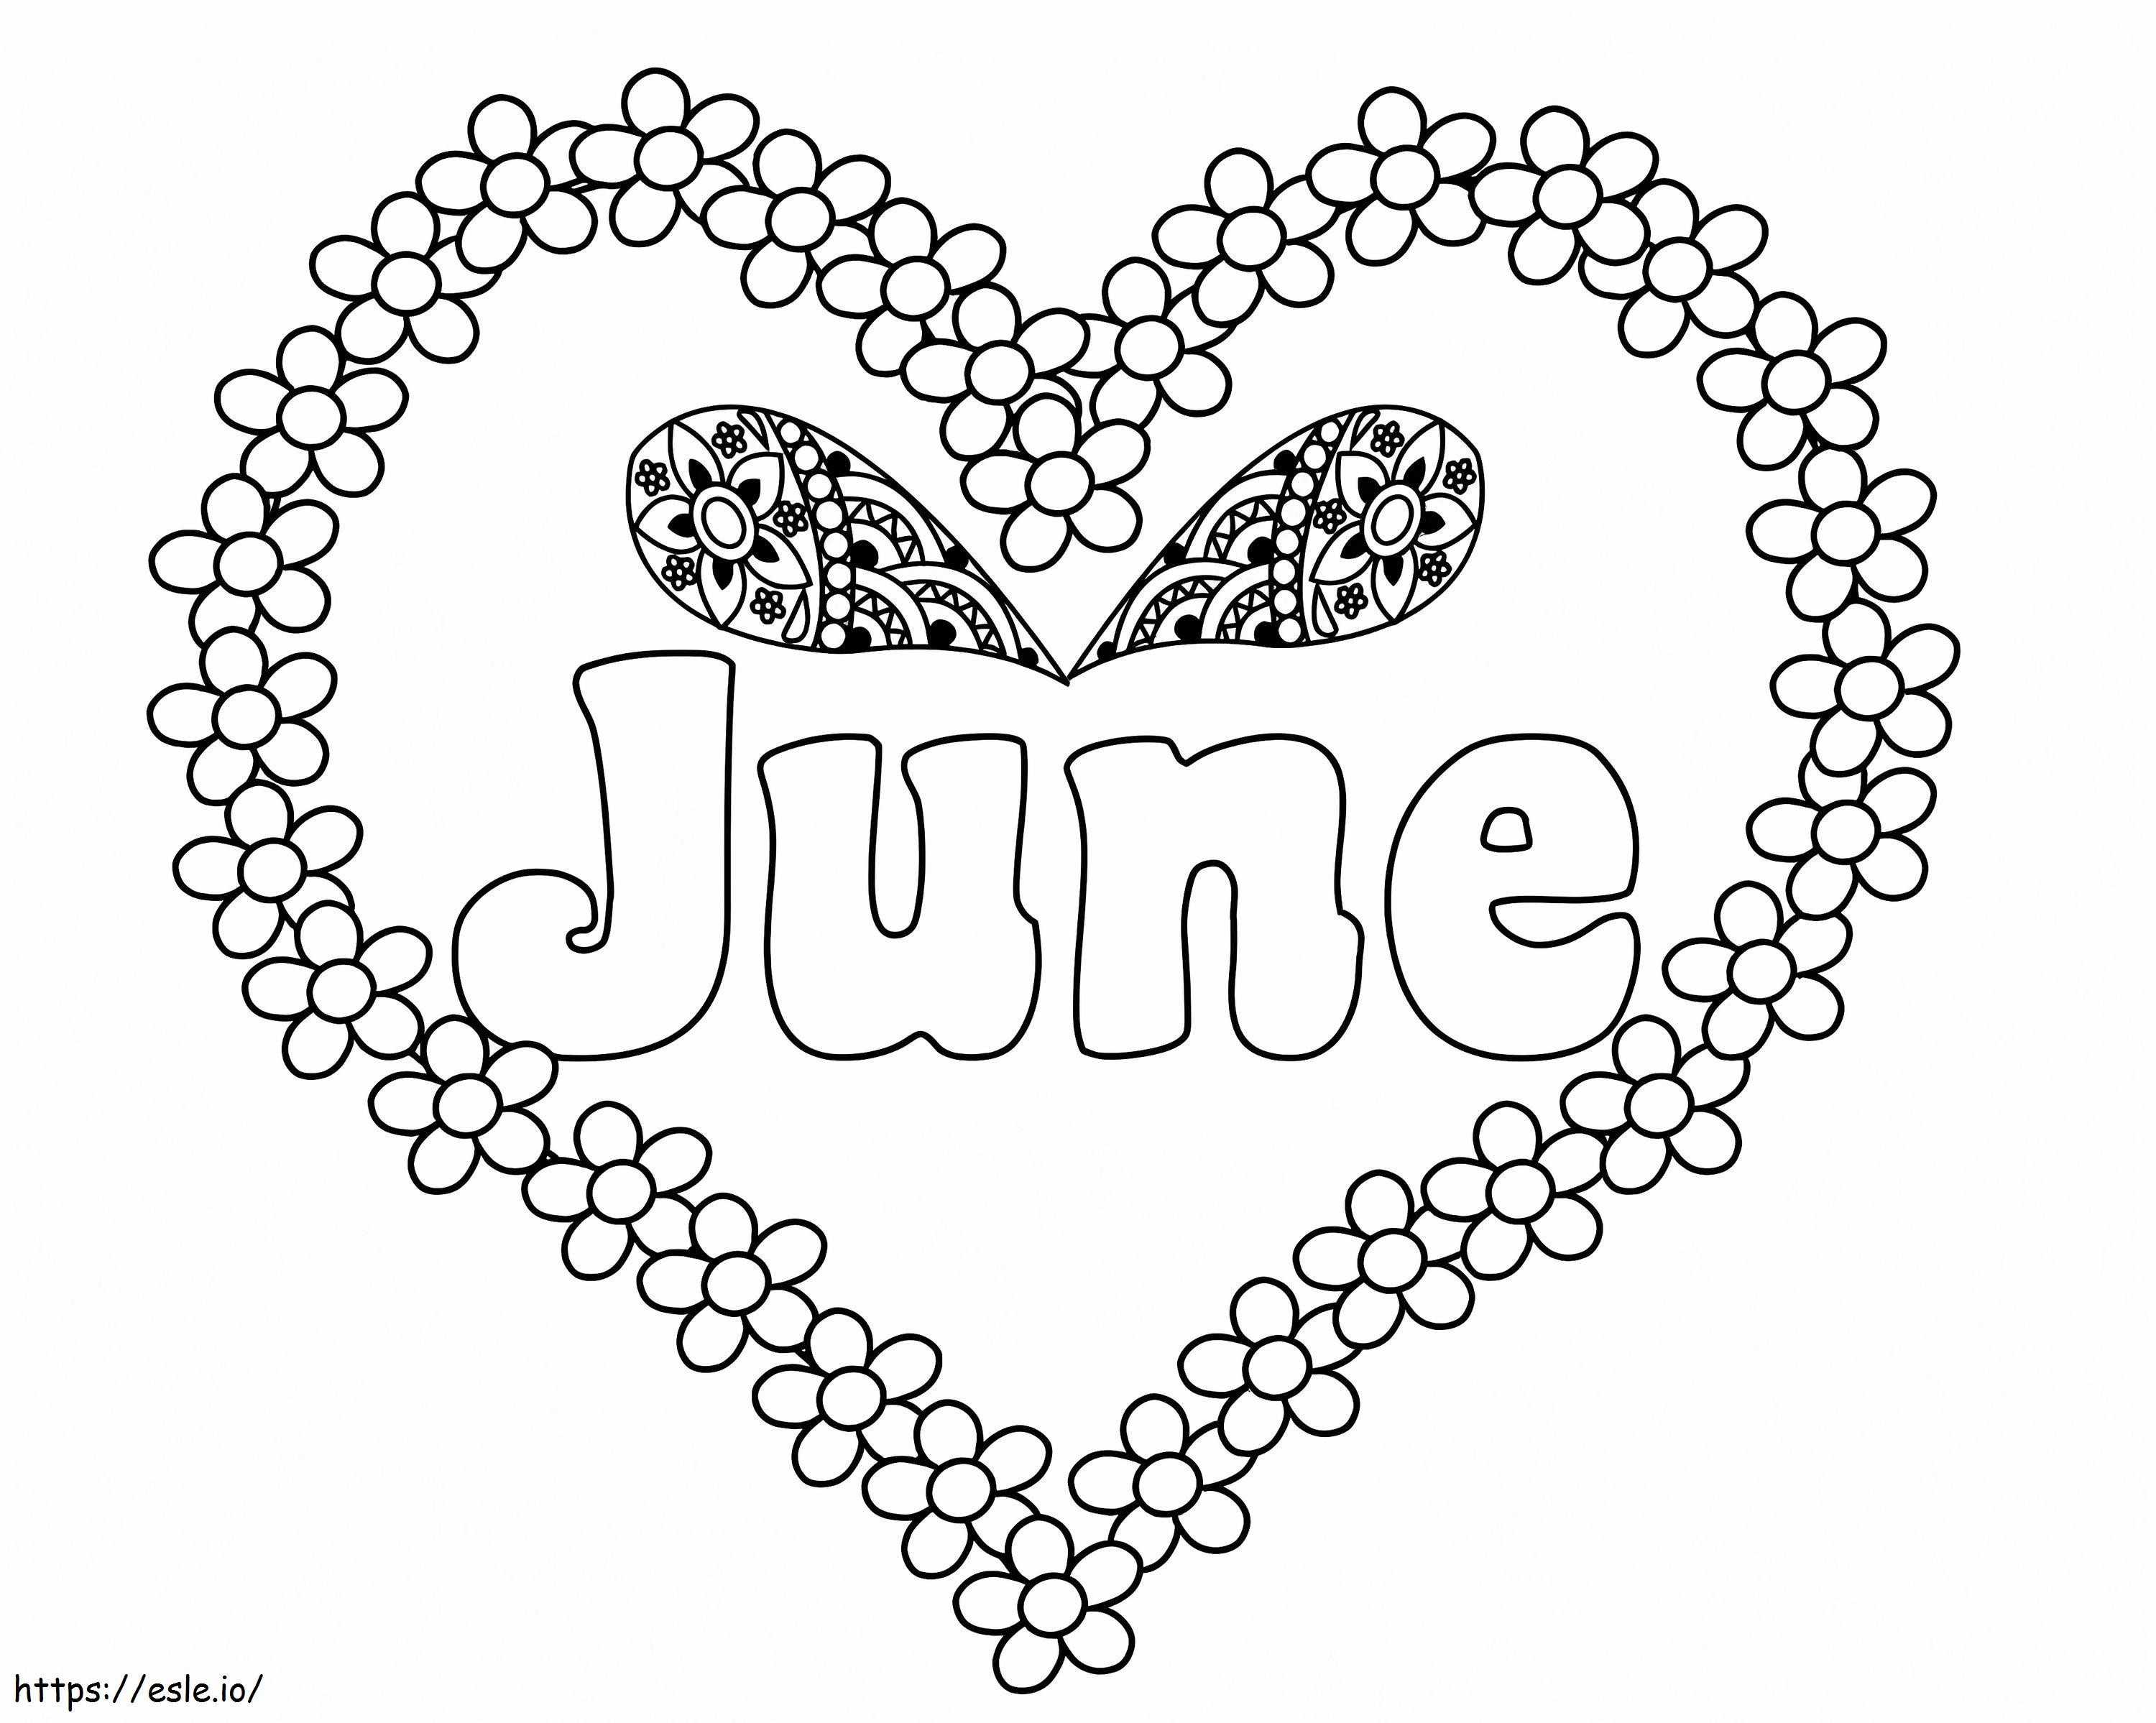 June 8 coloring page